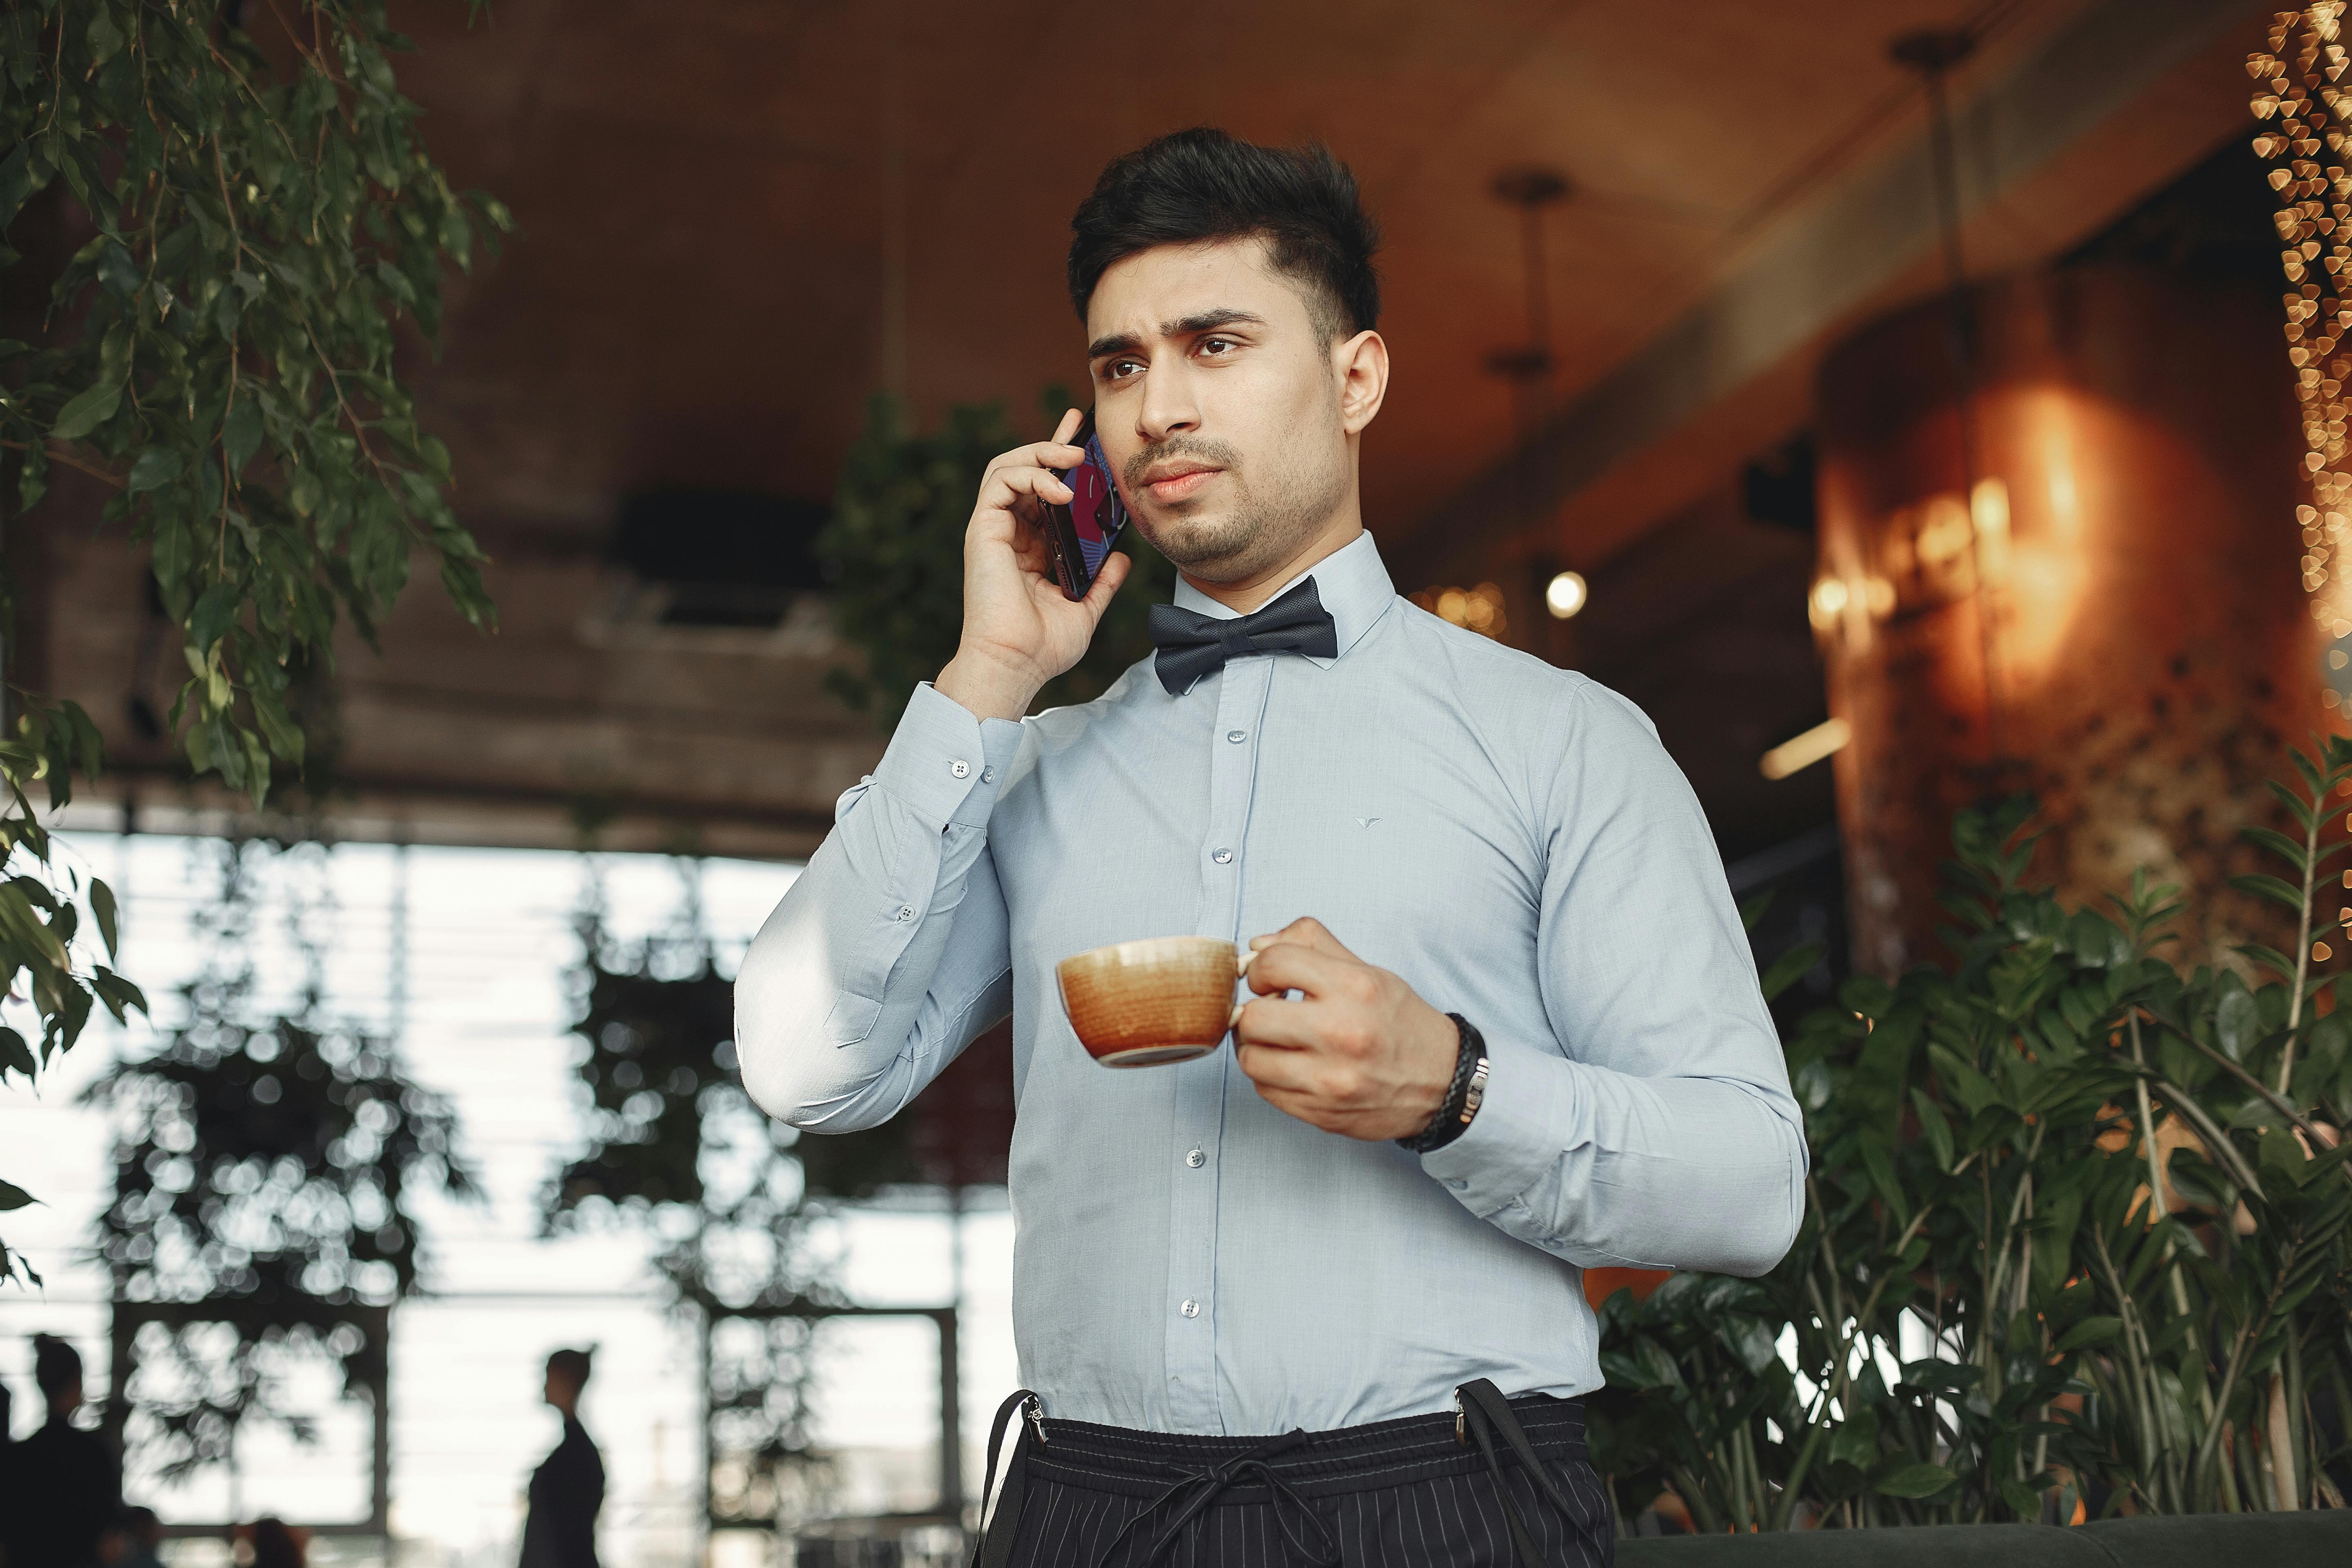 A serious-looking man talking on the phone while holding a beverage | Source: Pexels